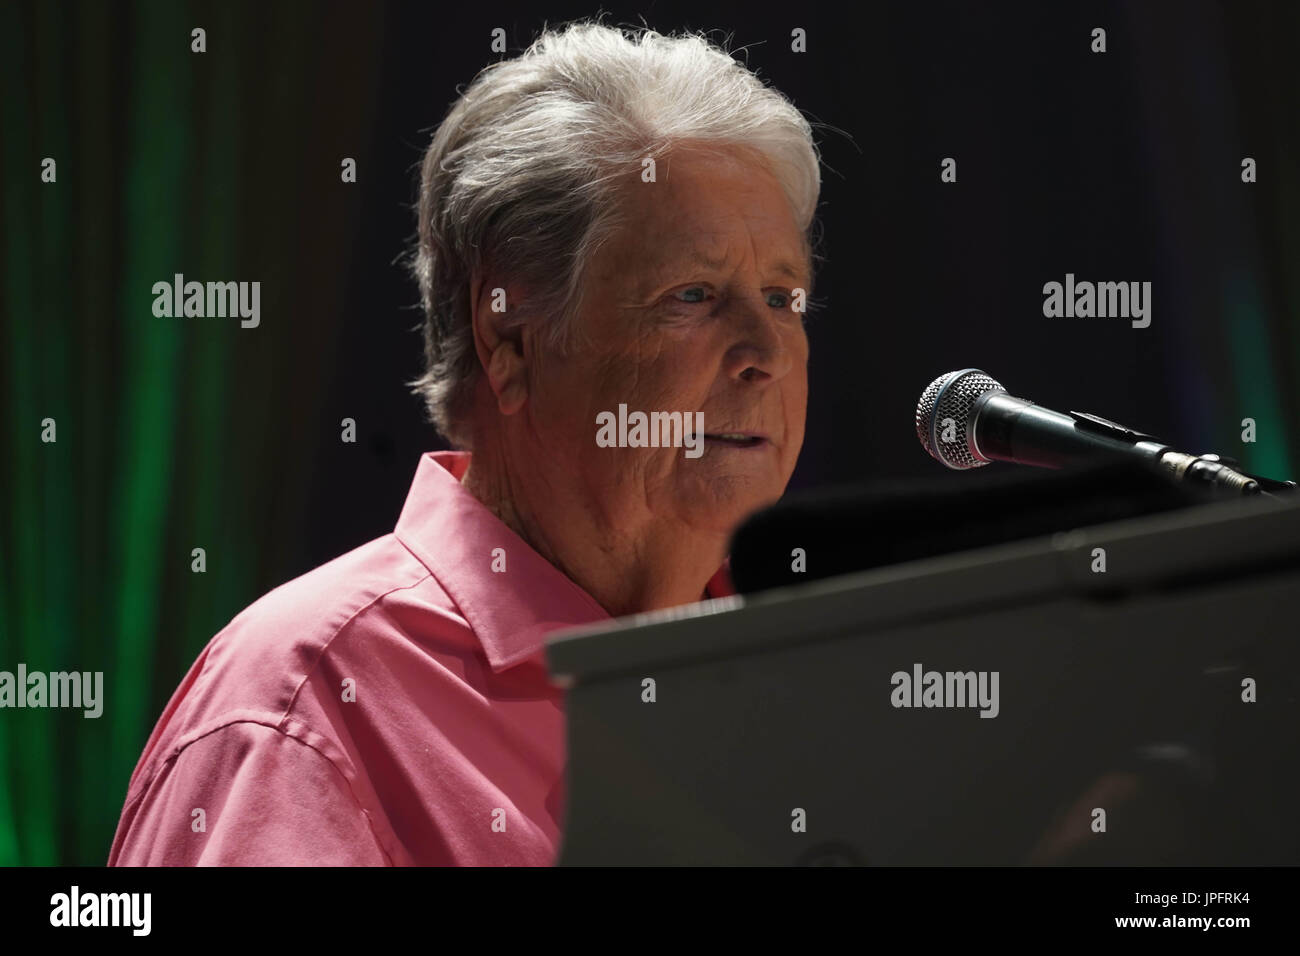 Brian Wilson performing live on stage at Hammersmith Eventim in London as part of the celebration of the 50th anniversary of the Beach Boys' album Pet Sounds. Photo date: Tuesday, August 1, 2017. Photo credit should read: Roger Garfield/Alamy Stock Photo